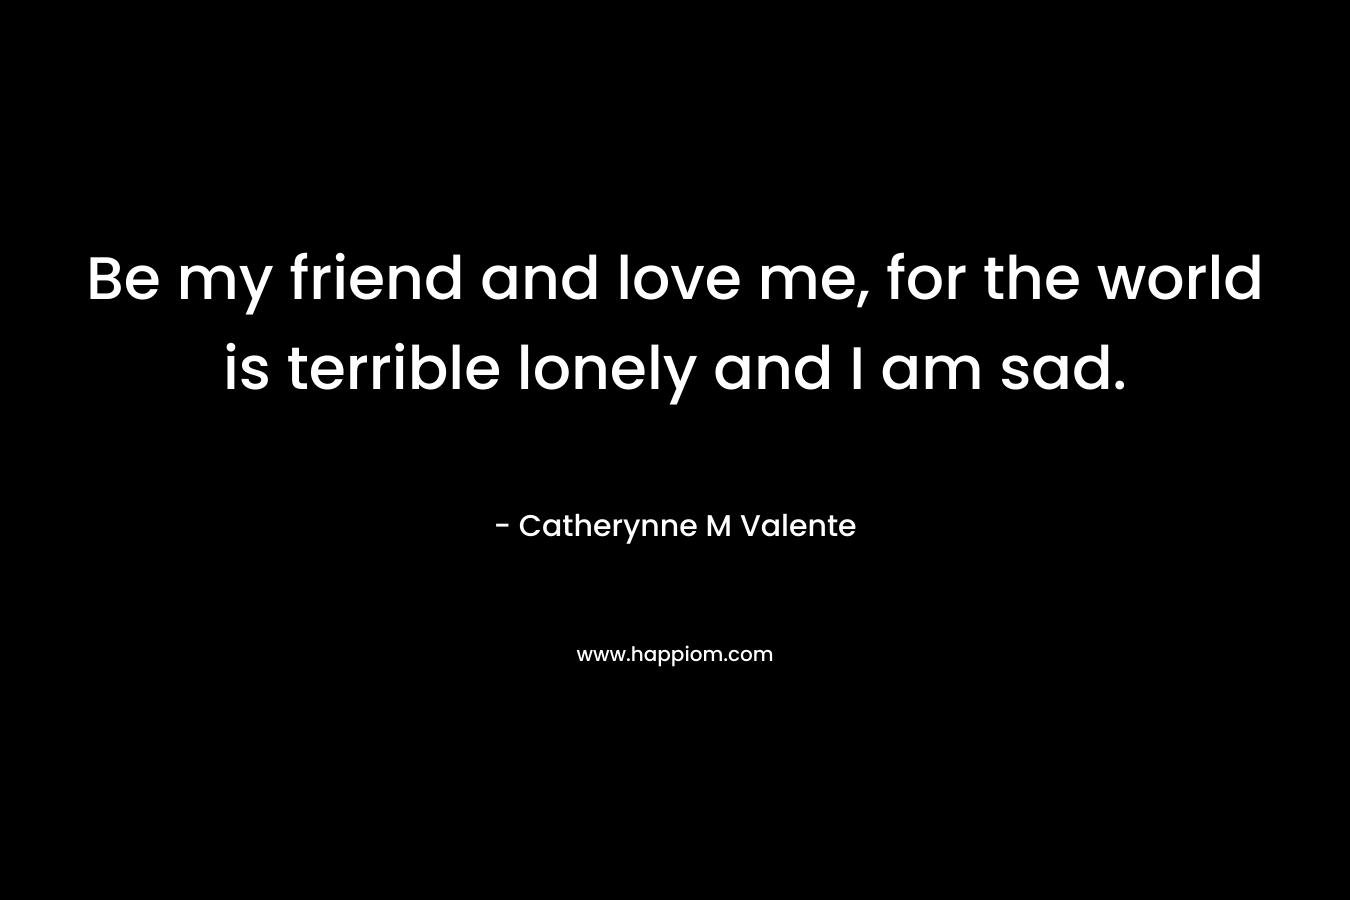 Be my friend and love me, for the world is terrible lonely and I am sad.